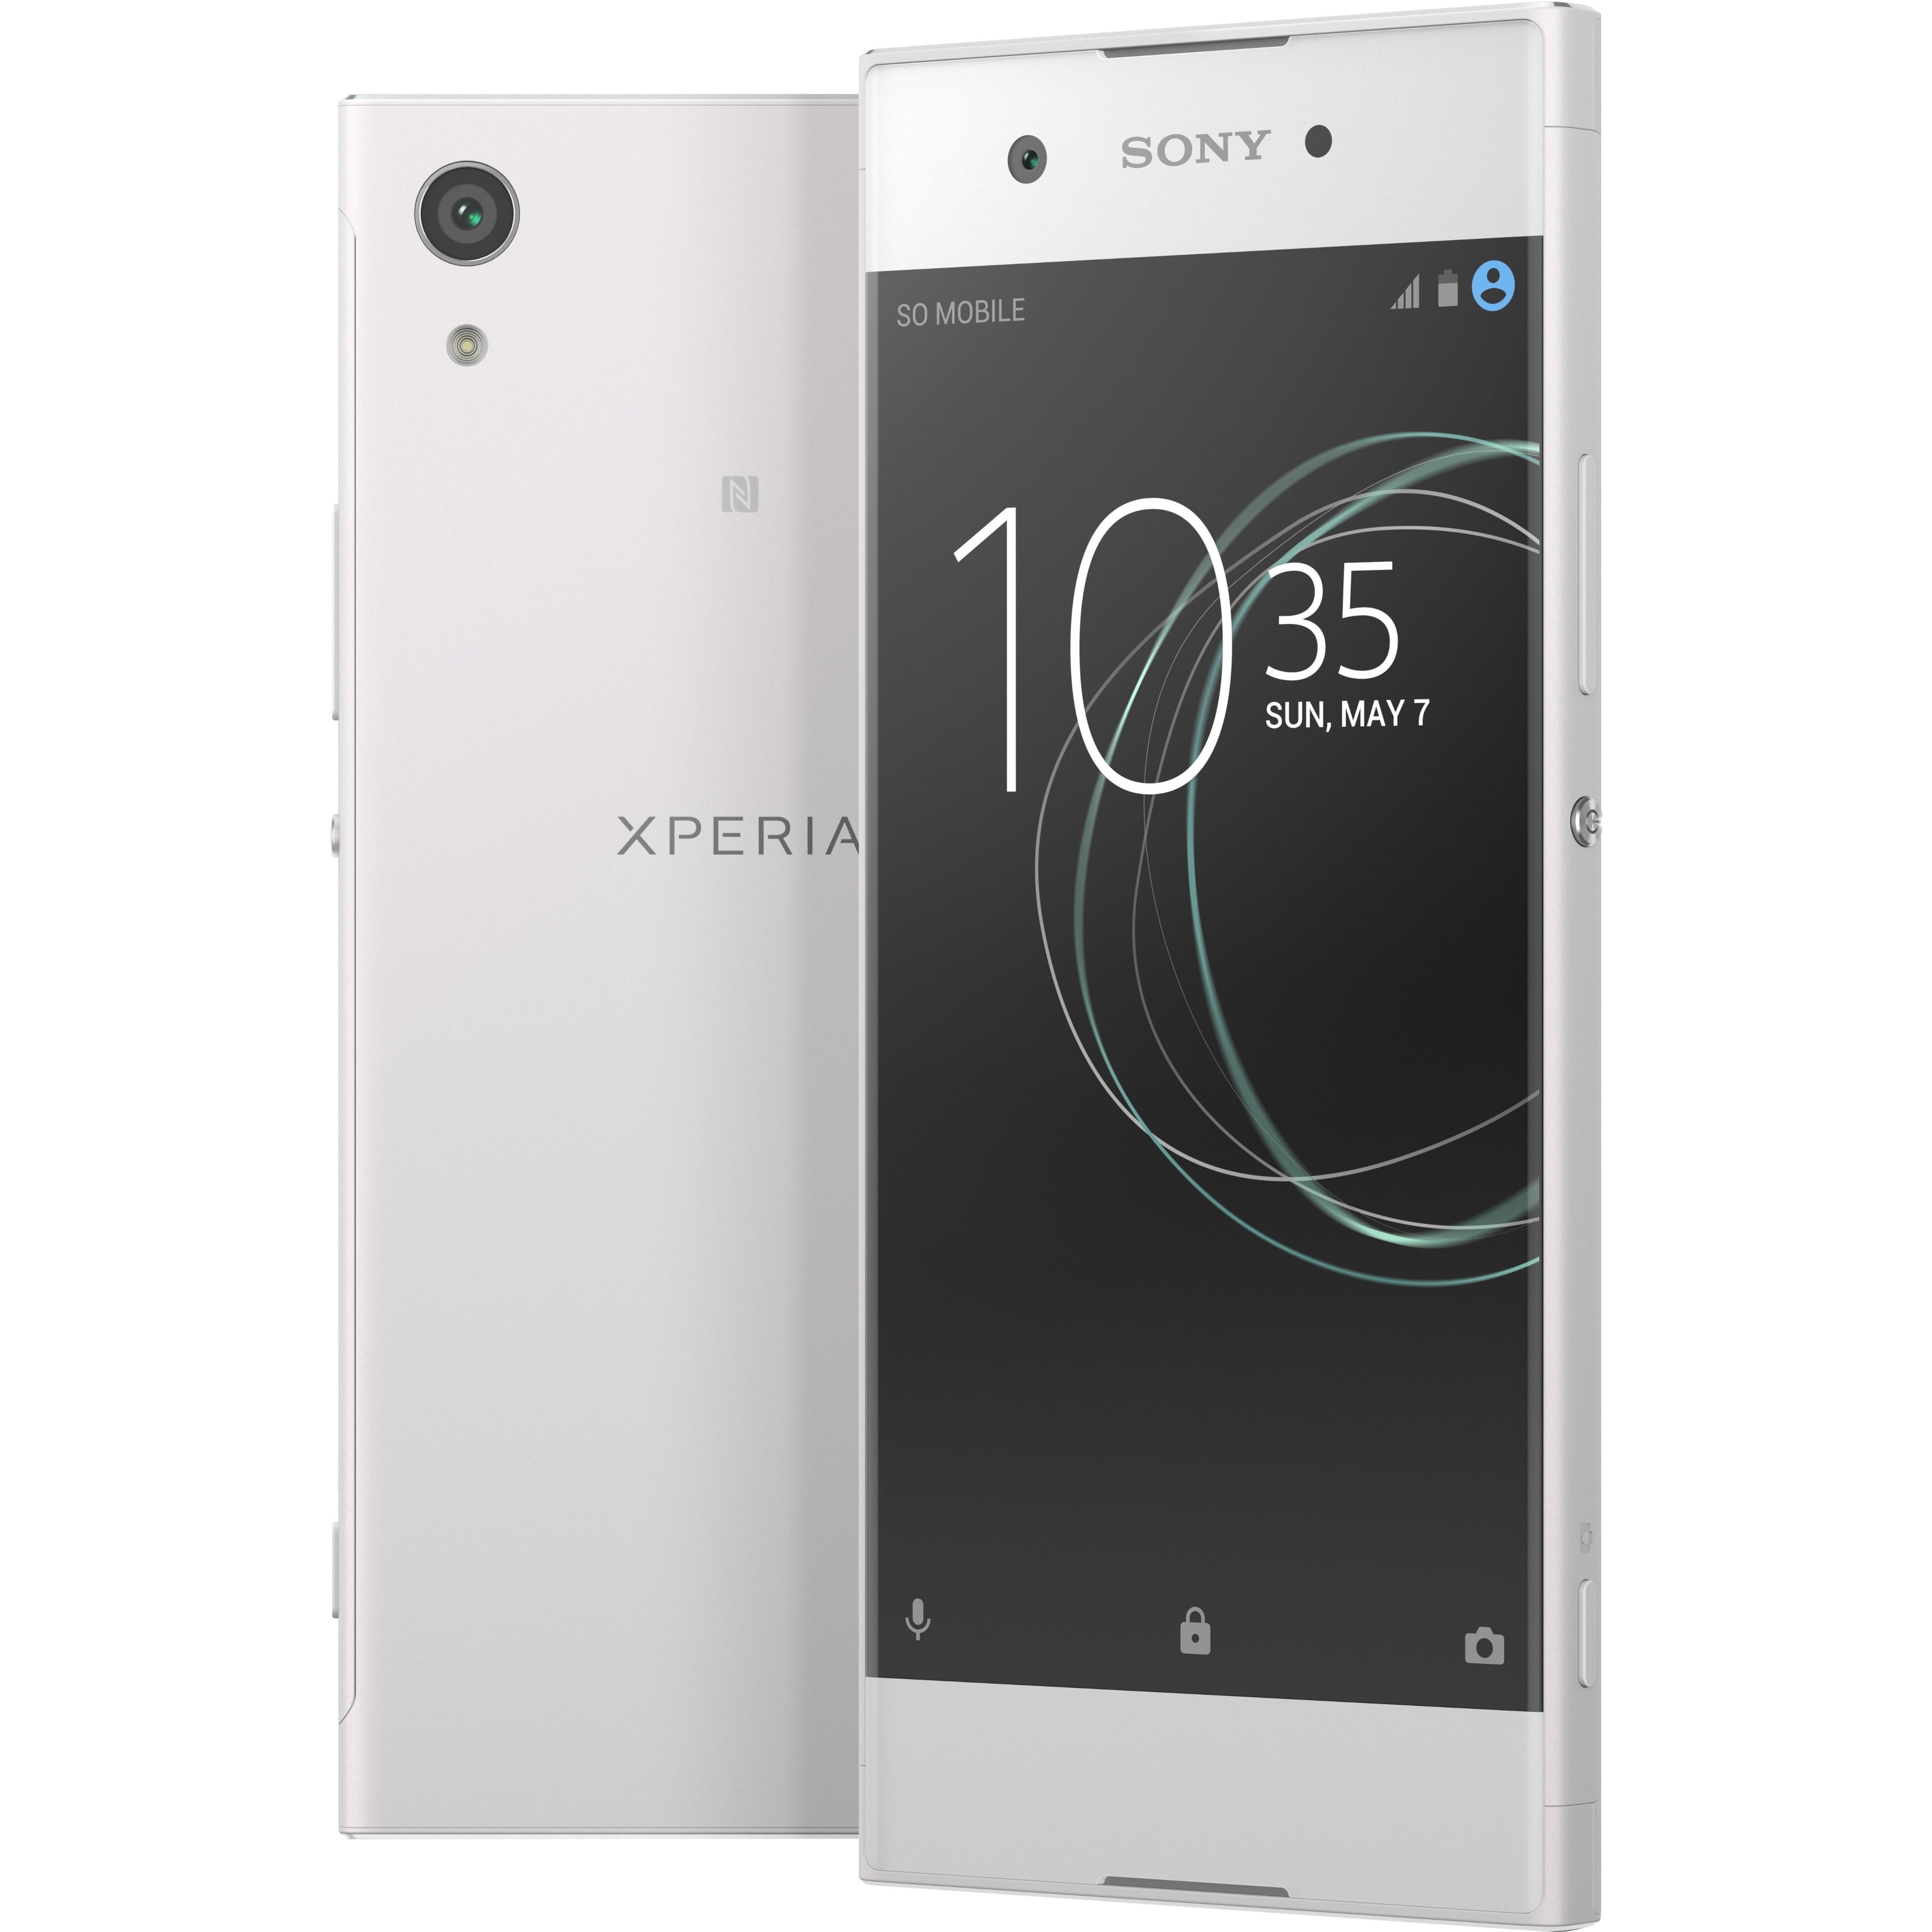 Sony Mobile Sony Xperia Ultra G3223 32 GB Smartphone, 6" LCD Full HD 1920 x 1080, Octa-core (8 Core) 2.30 GHz, 4 RAM, Android 7.0 Nougat, 4G, White -